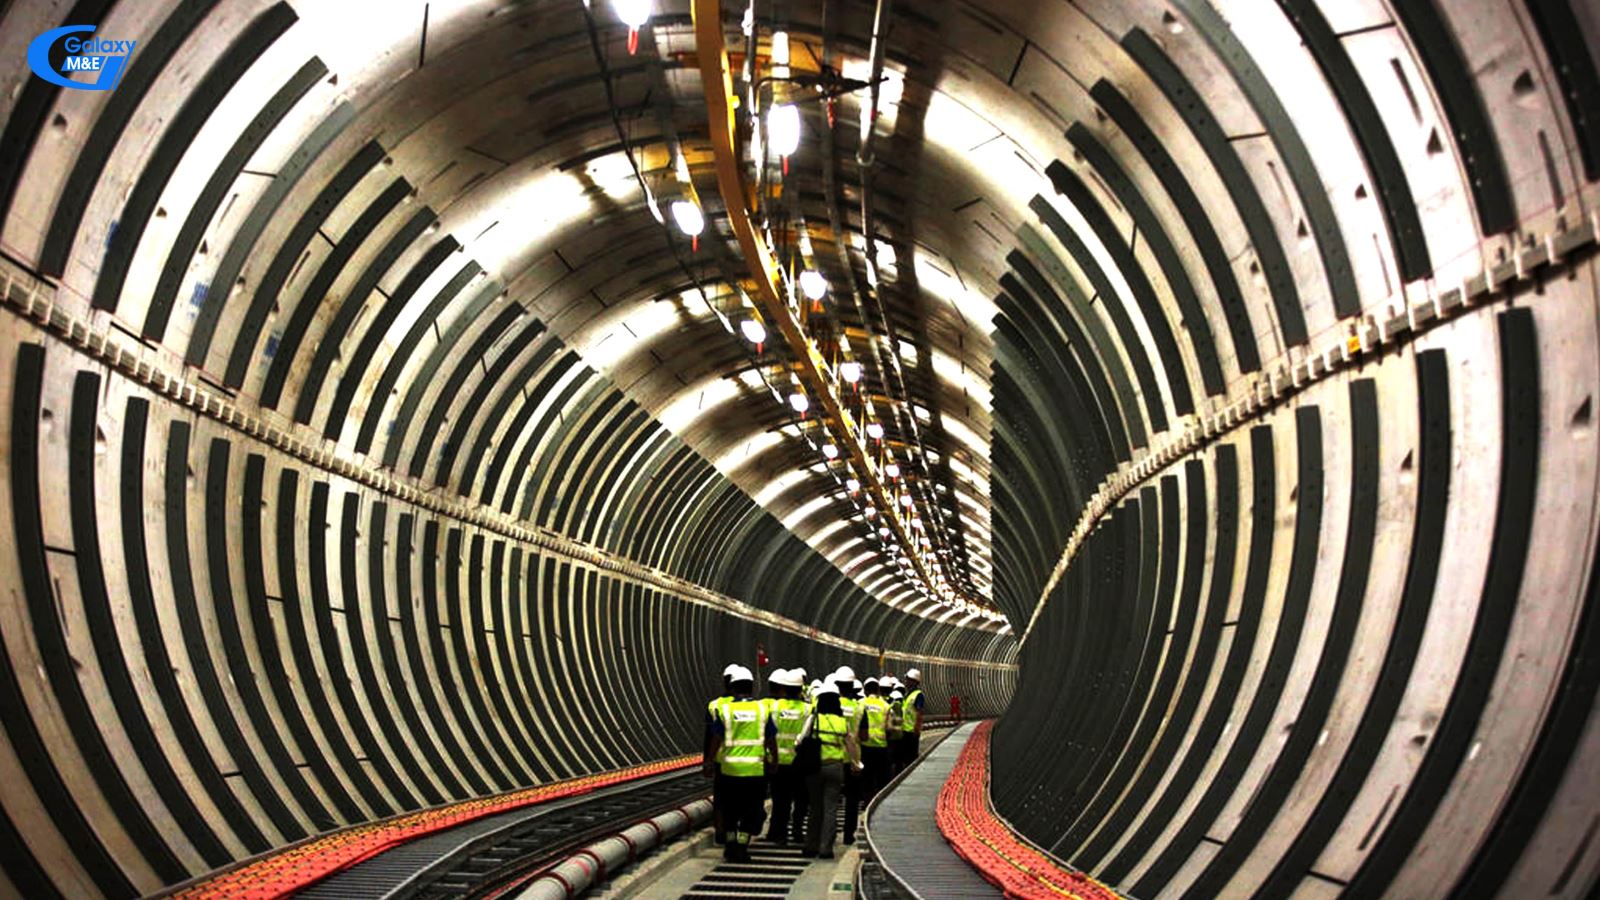 The underground transmission cable tunnel in Singapore is 40 km long, 6 m wide, 60 m to 80 m deep above sea level. They can hold 1,200 Km of high voltage cable. This system was built with the amount more than $ 2.4 billion | Galaxy M&E